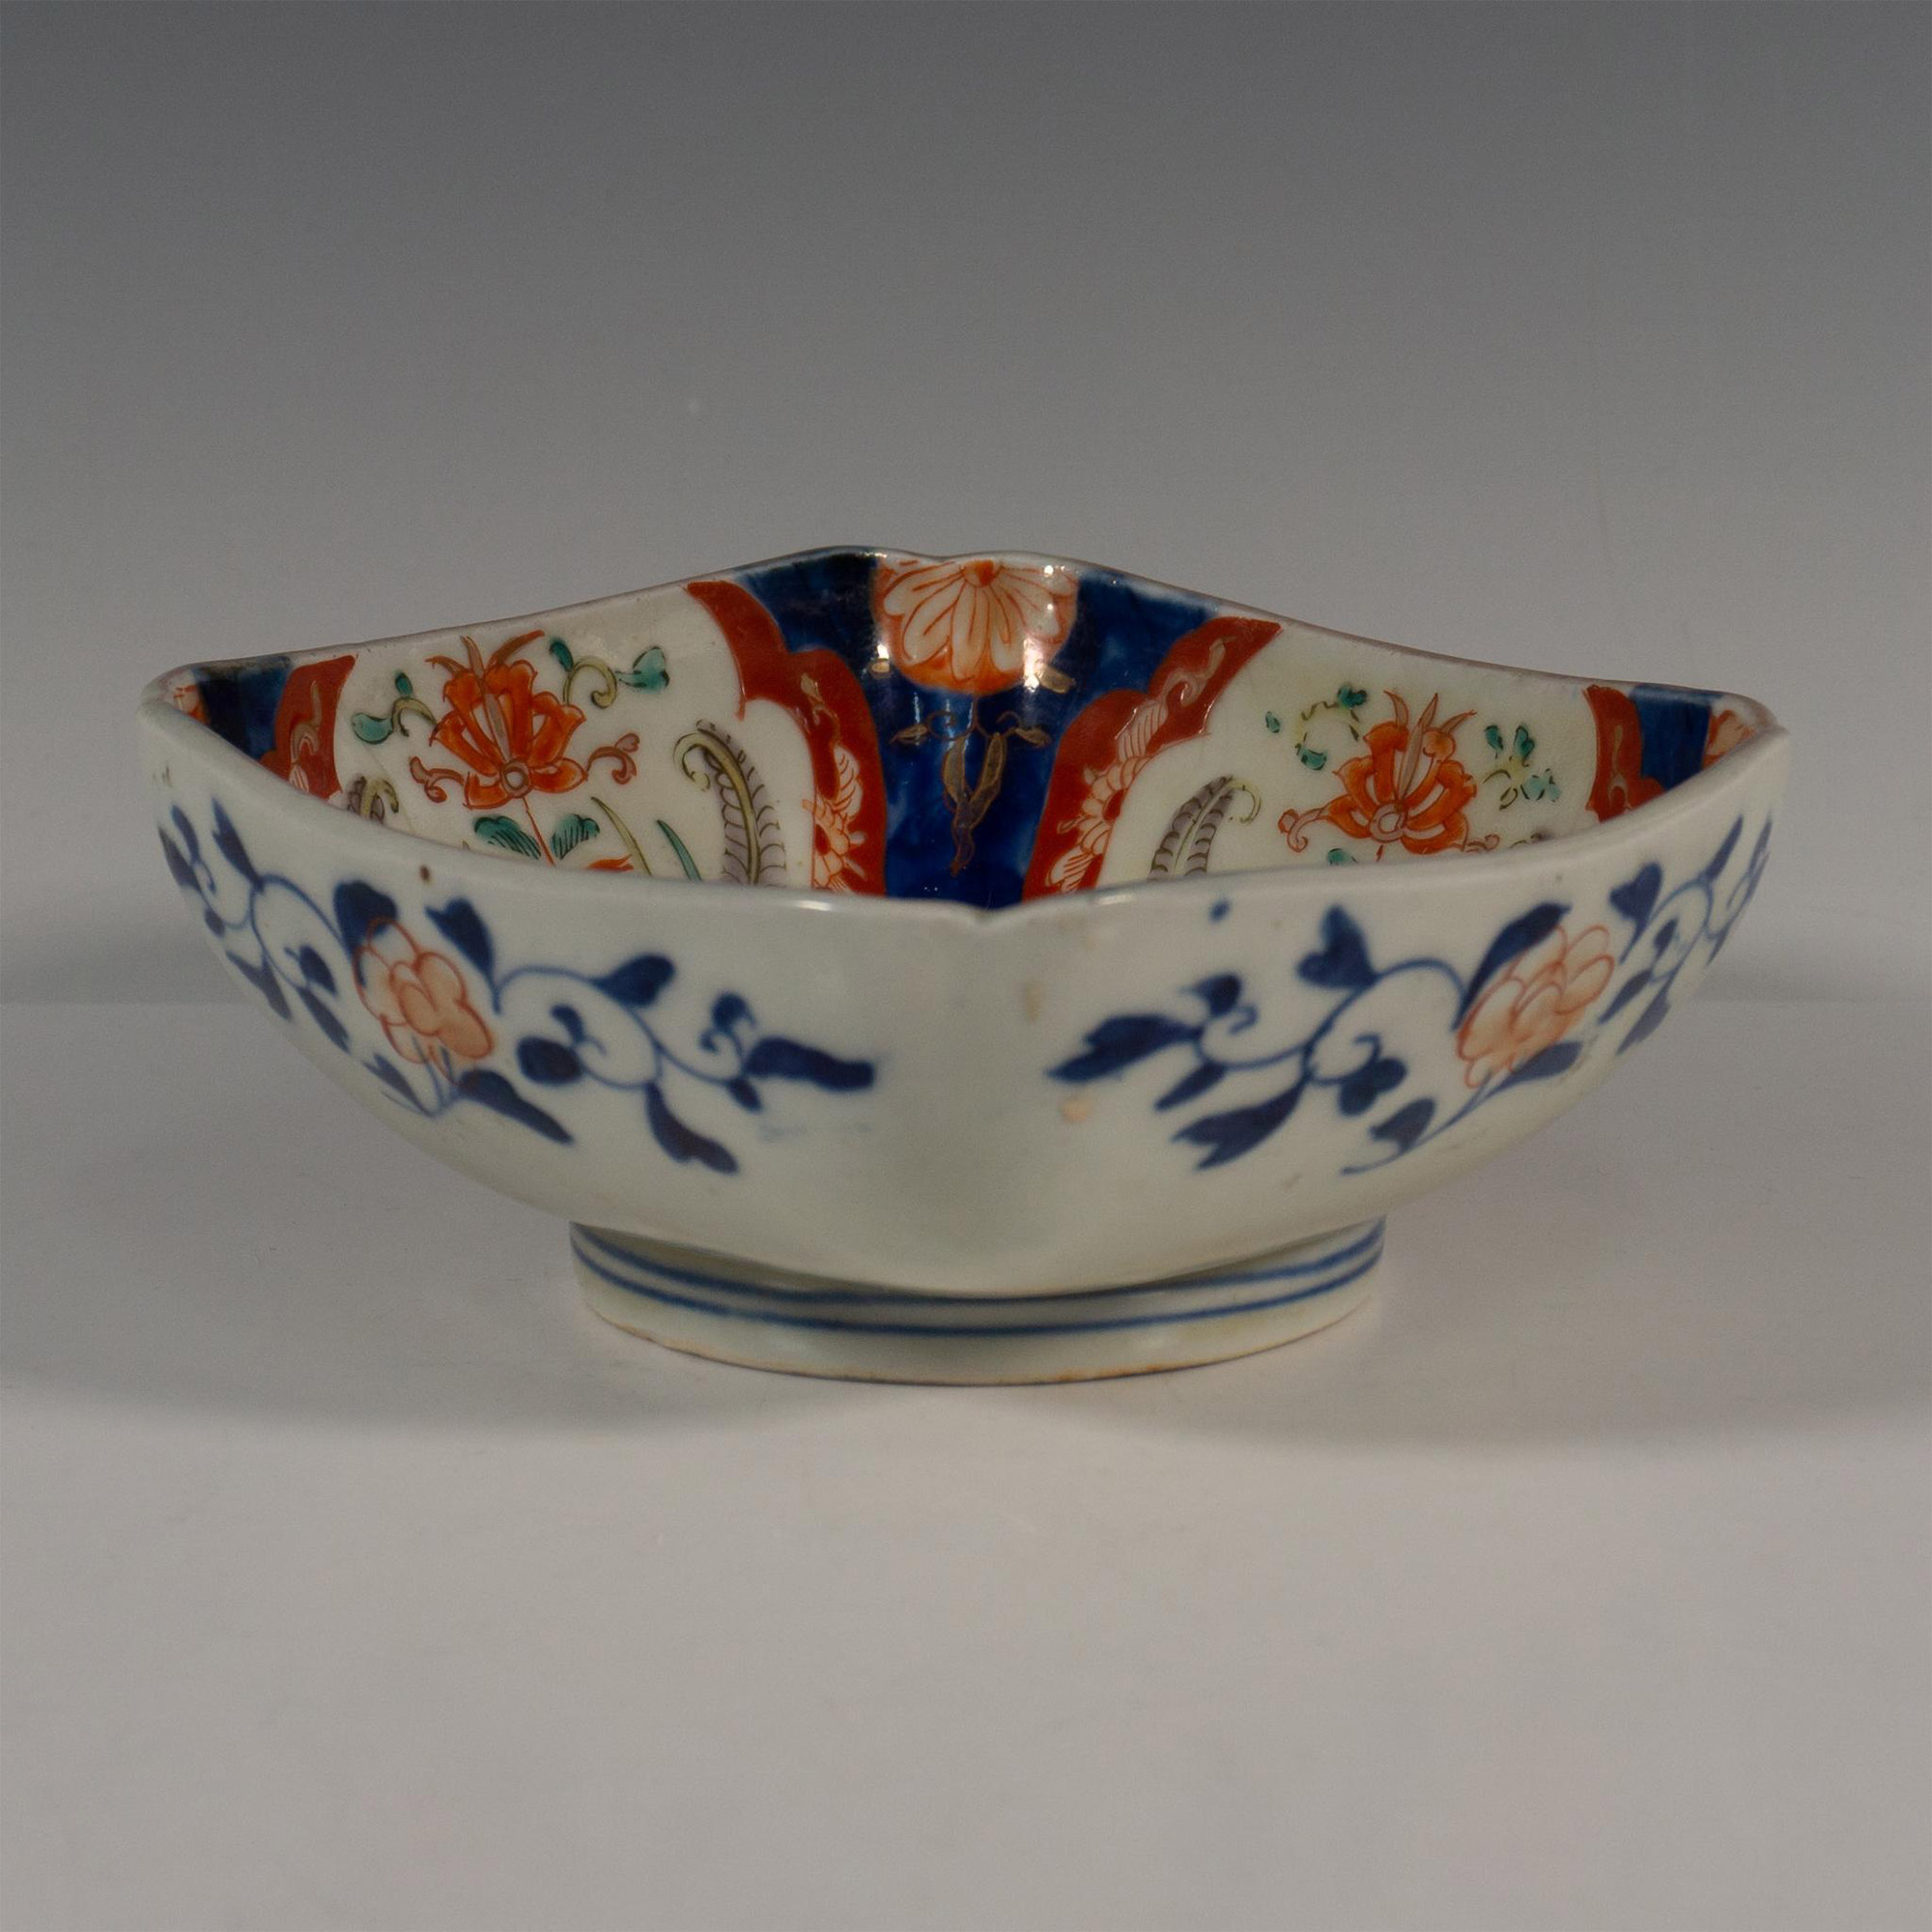 Oriental Hand-Painted Porcelain Dish Dragons & Flora Designs - Image 2 of 4